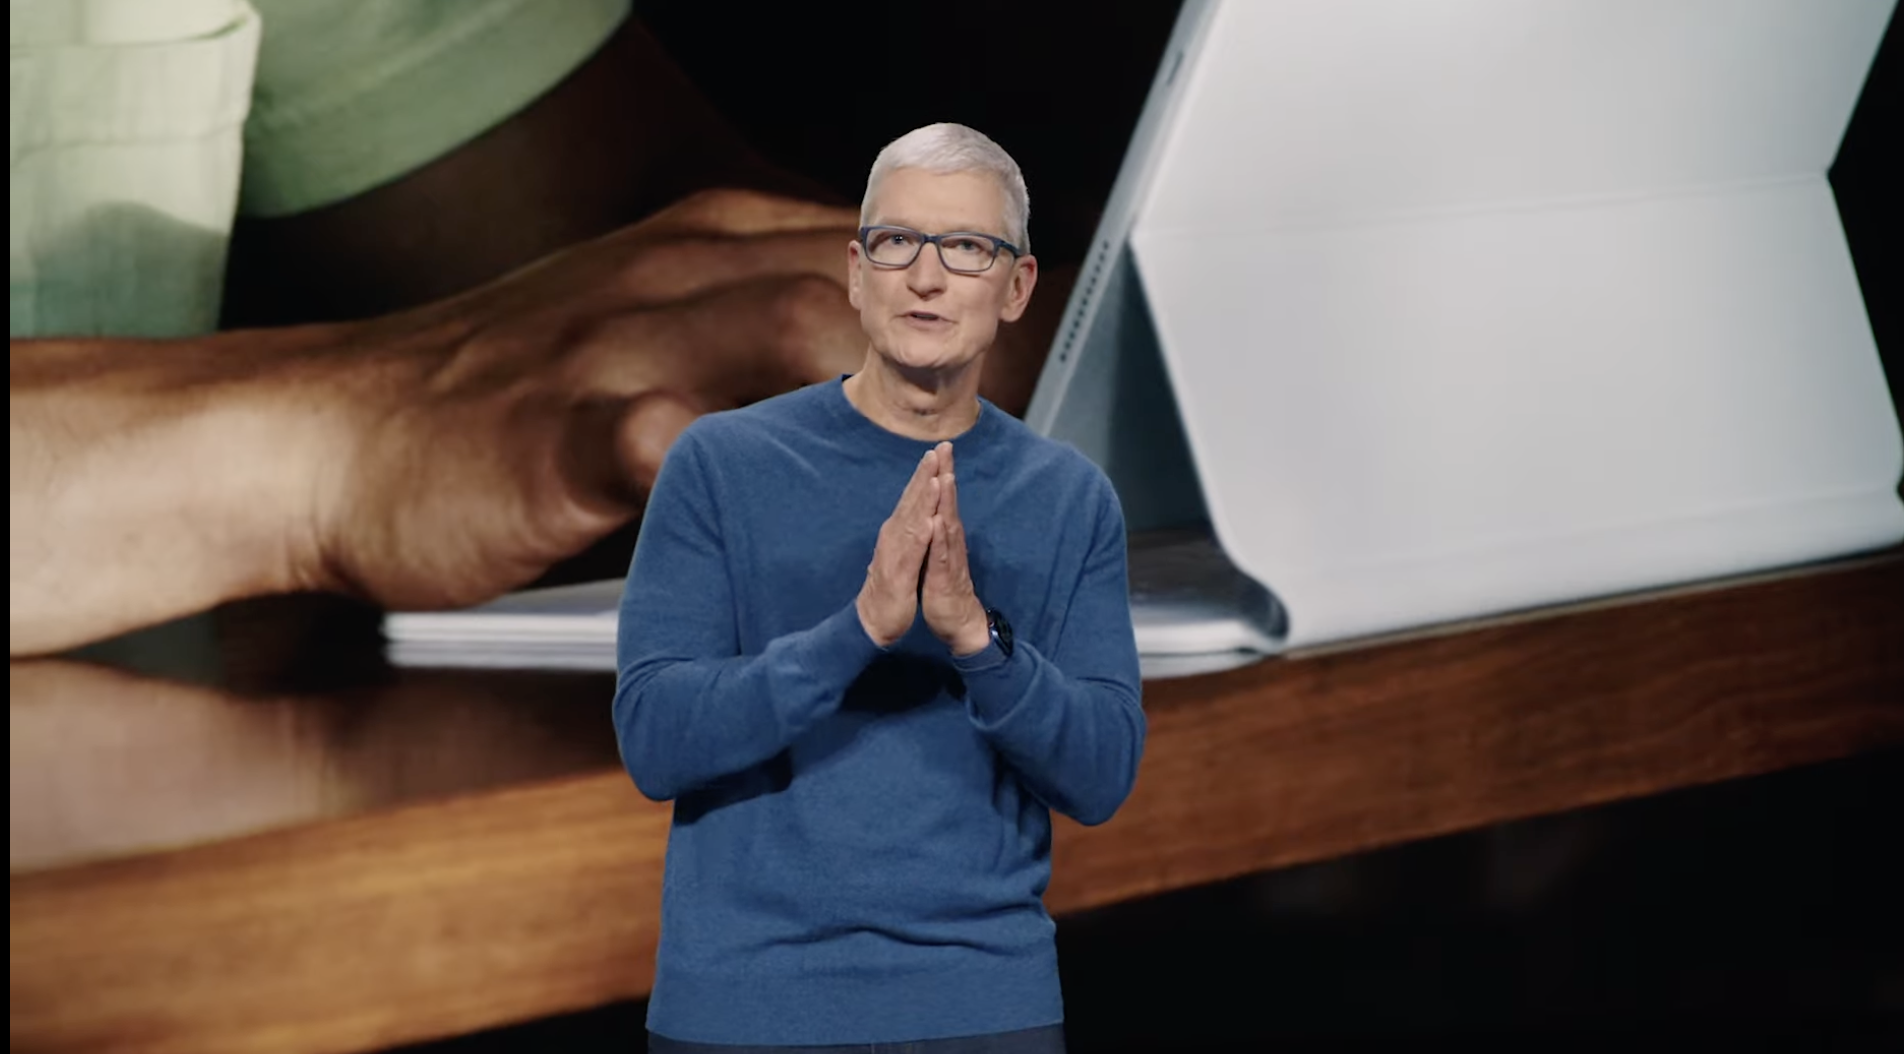 Tim Cook at Apple's iPhone 13 event